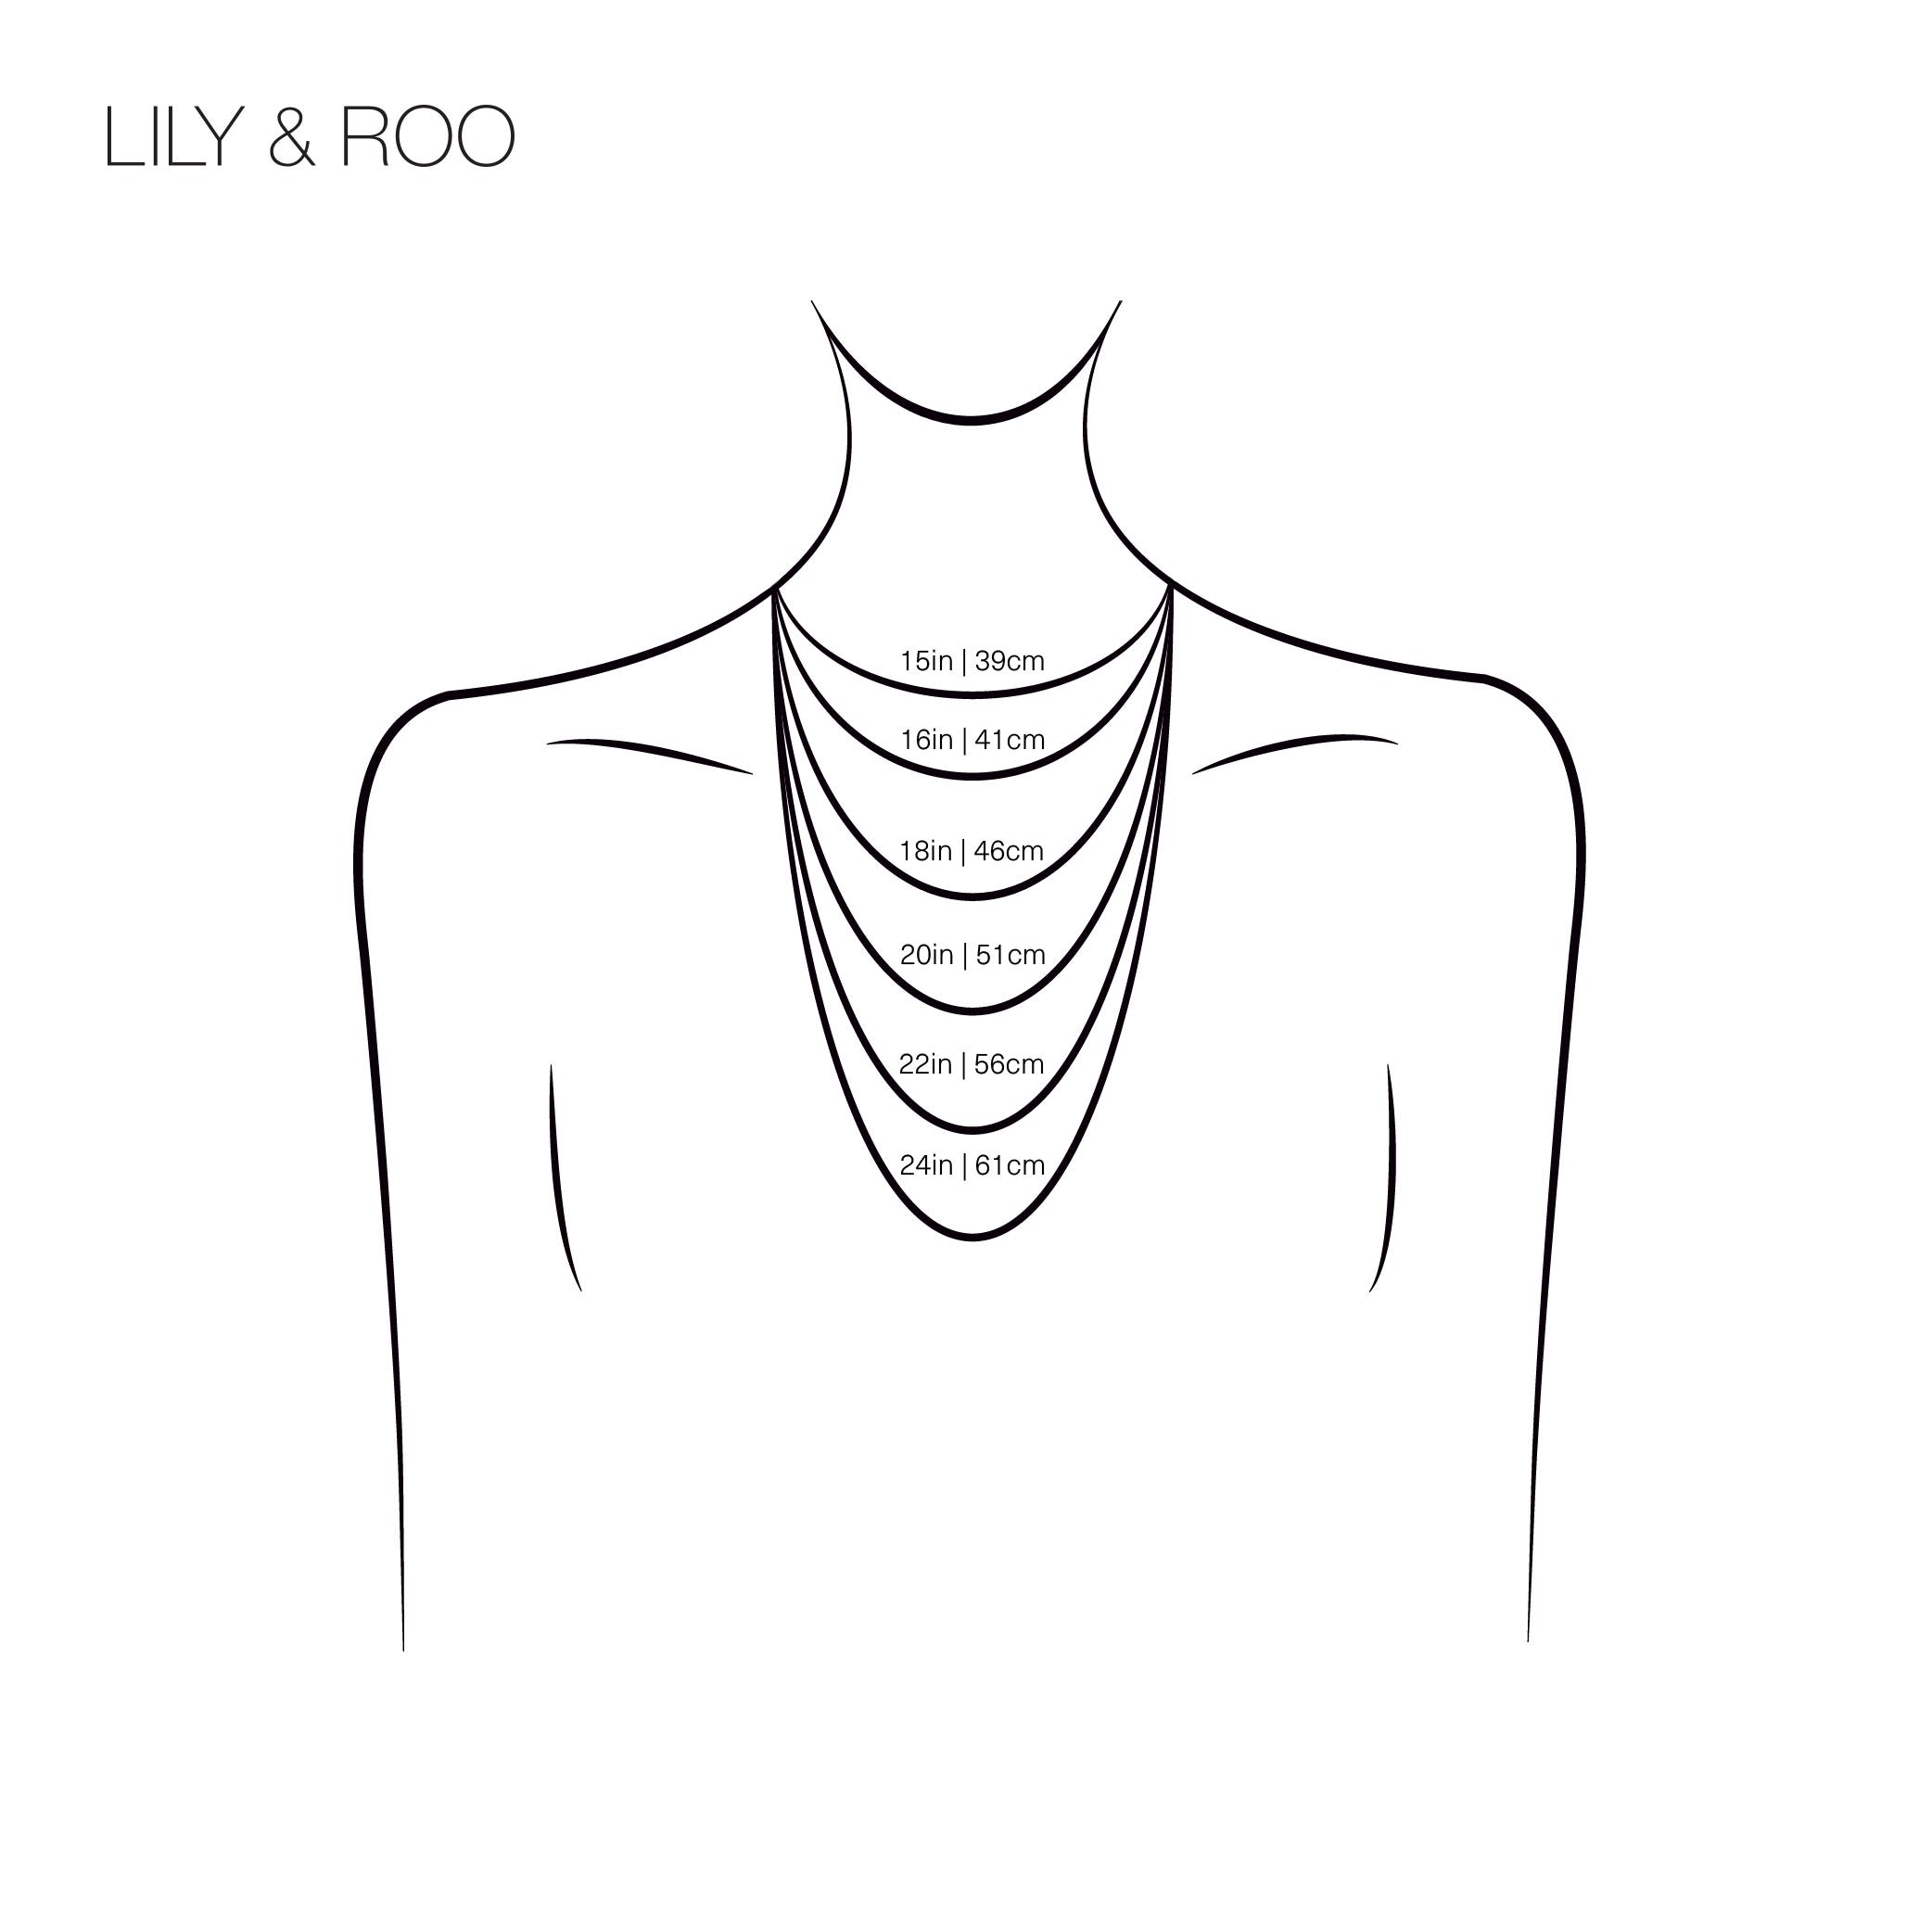 Necklace lengths drawn on a female silhouette with their lengths labelled in inches and centimeters 